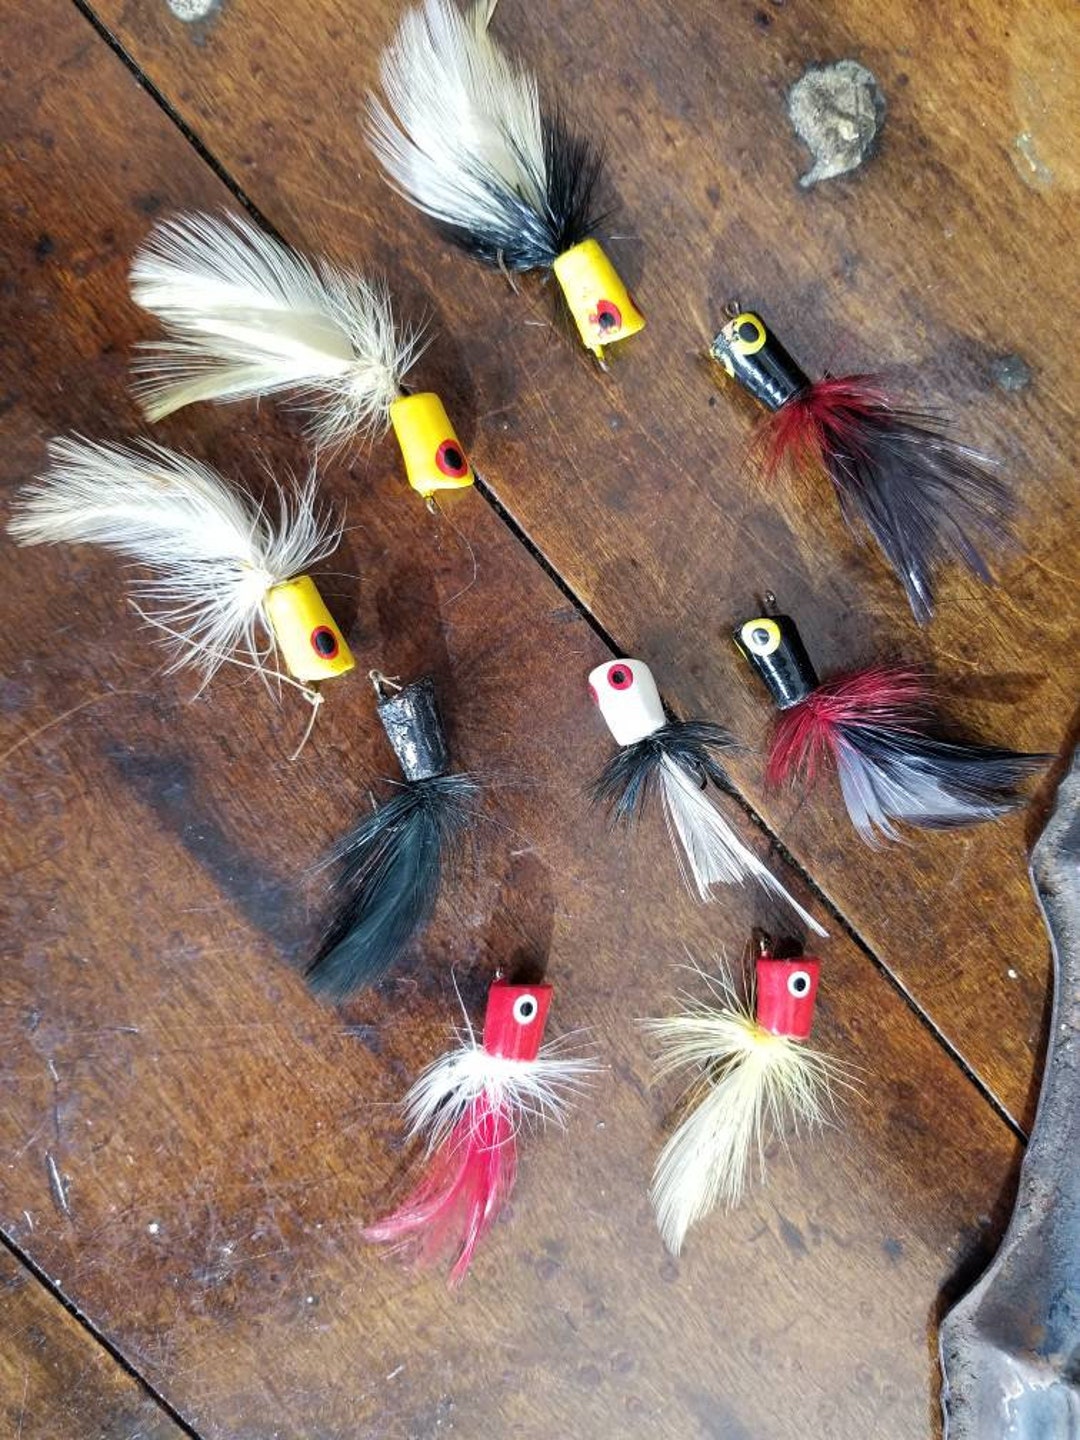 Vintage Feather Poppers Bass Fly Rod Fishing Luretackle Bait Nine Total  Poppers With Feathersred Yellow Black White Unknown Maker 